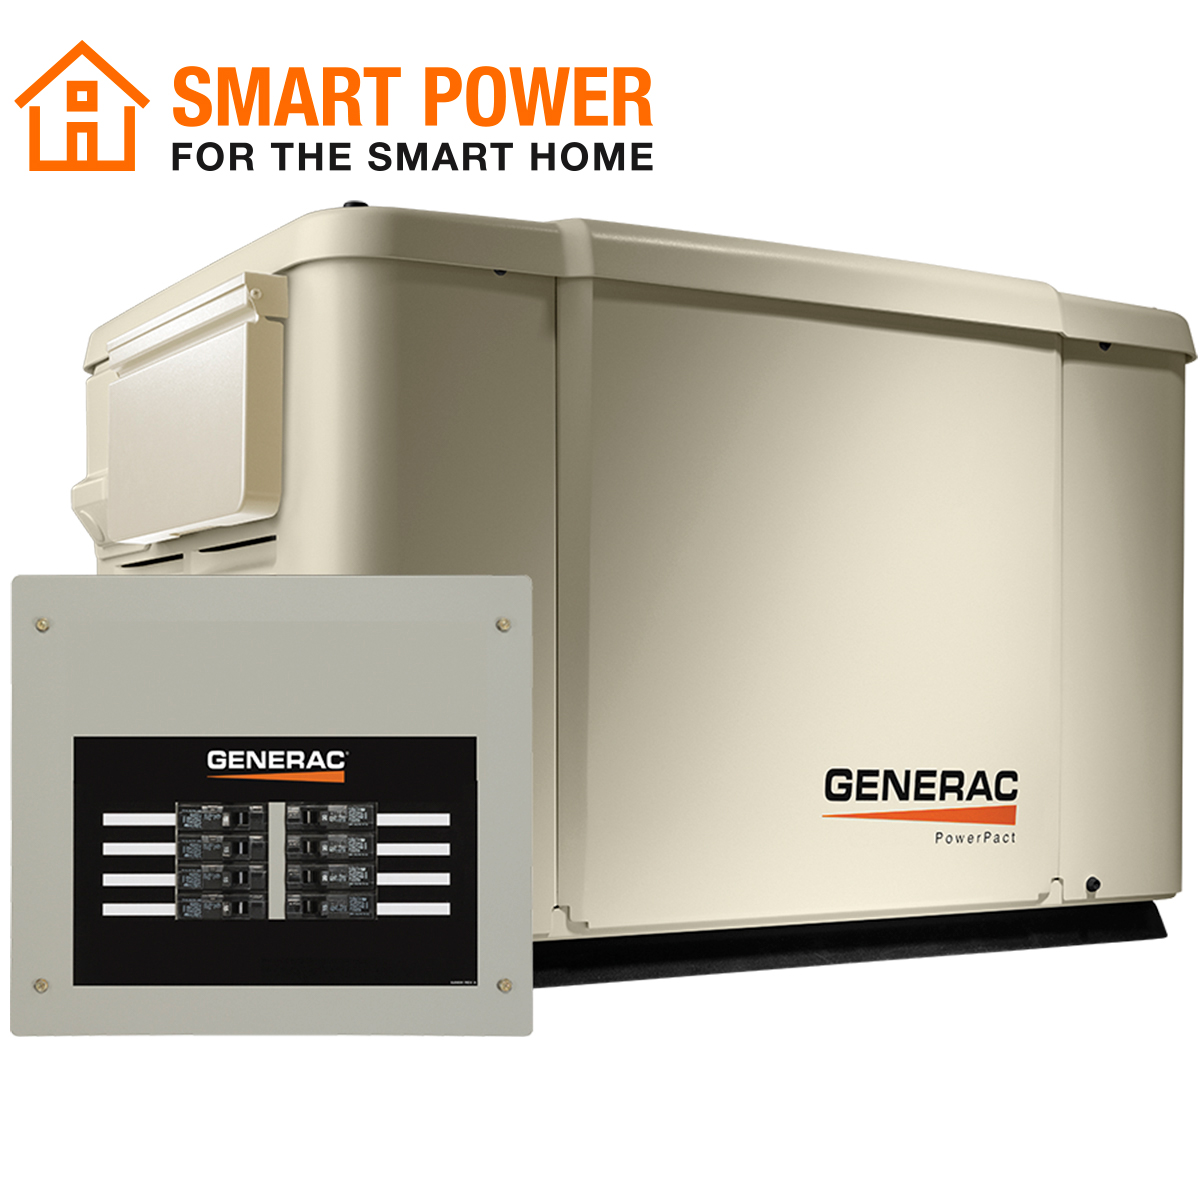 Generac PowerPact 7500/6000 Kilowatt, Air-Cooled Home Standby Generator with Automatic Transfer Switch, Non Portable, Model #6998 - image 3 of 10